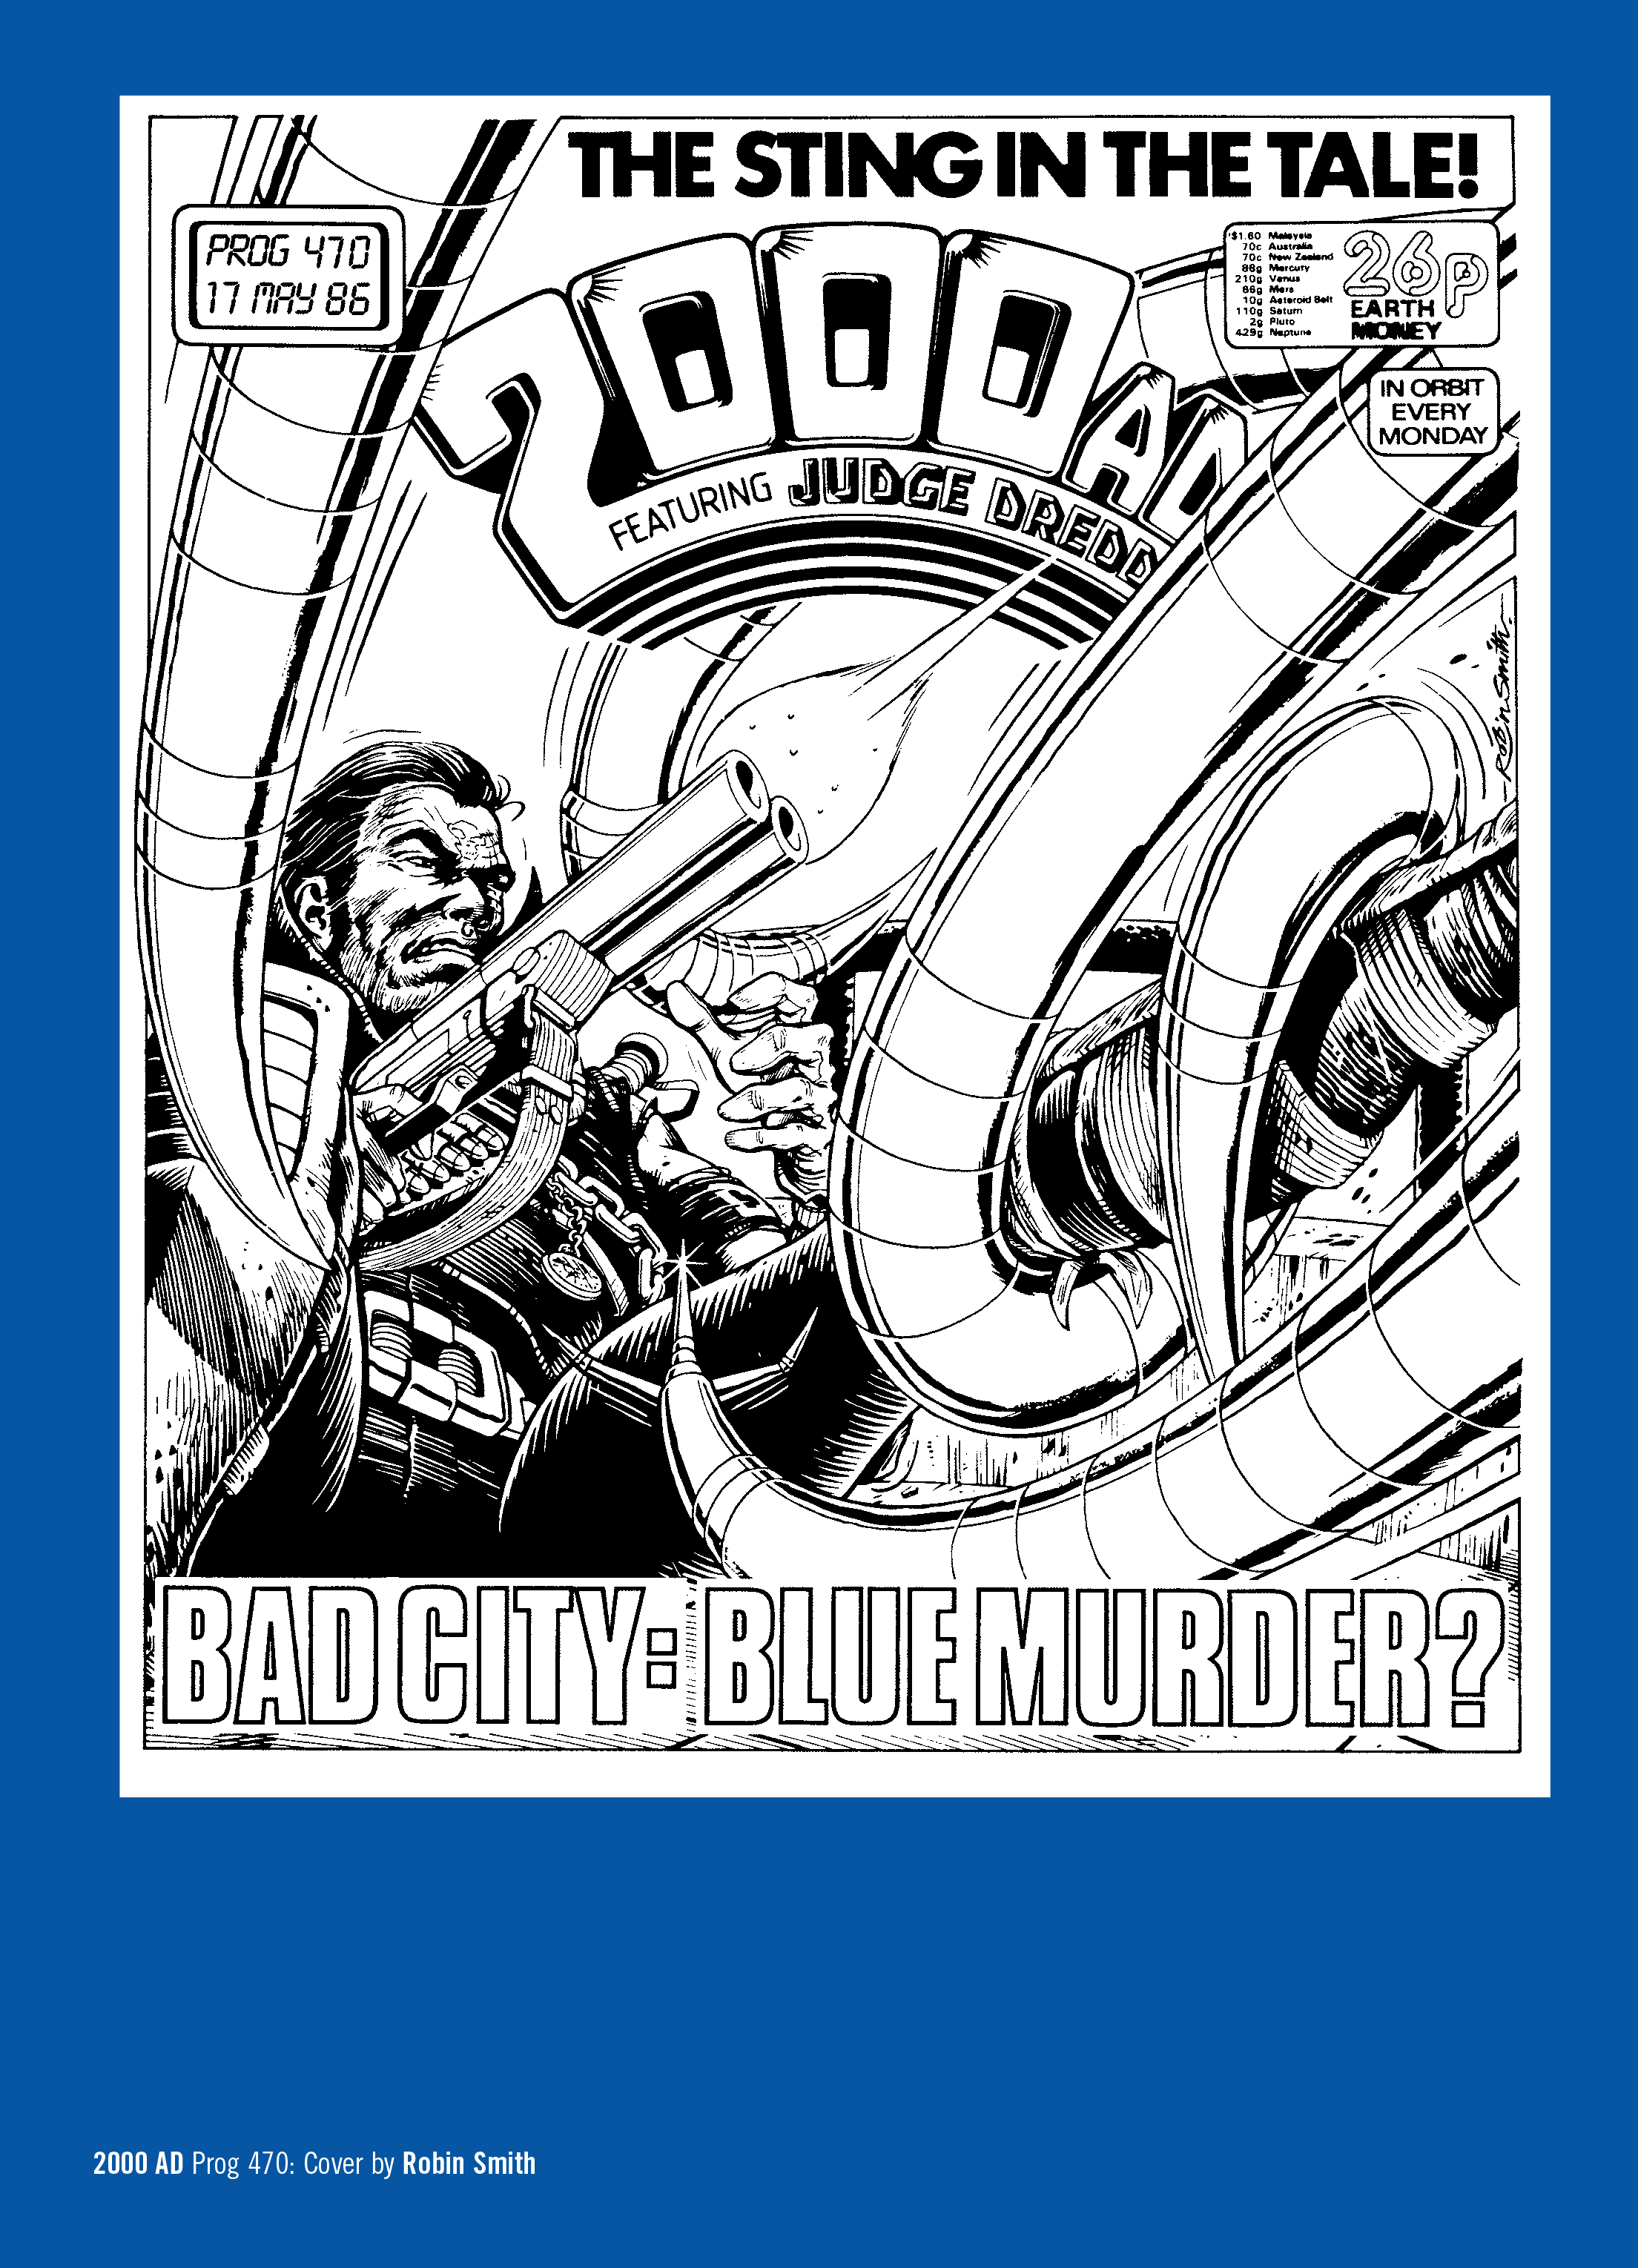 Read online Bad City Blue comic -  Issue # Full - 54